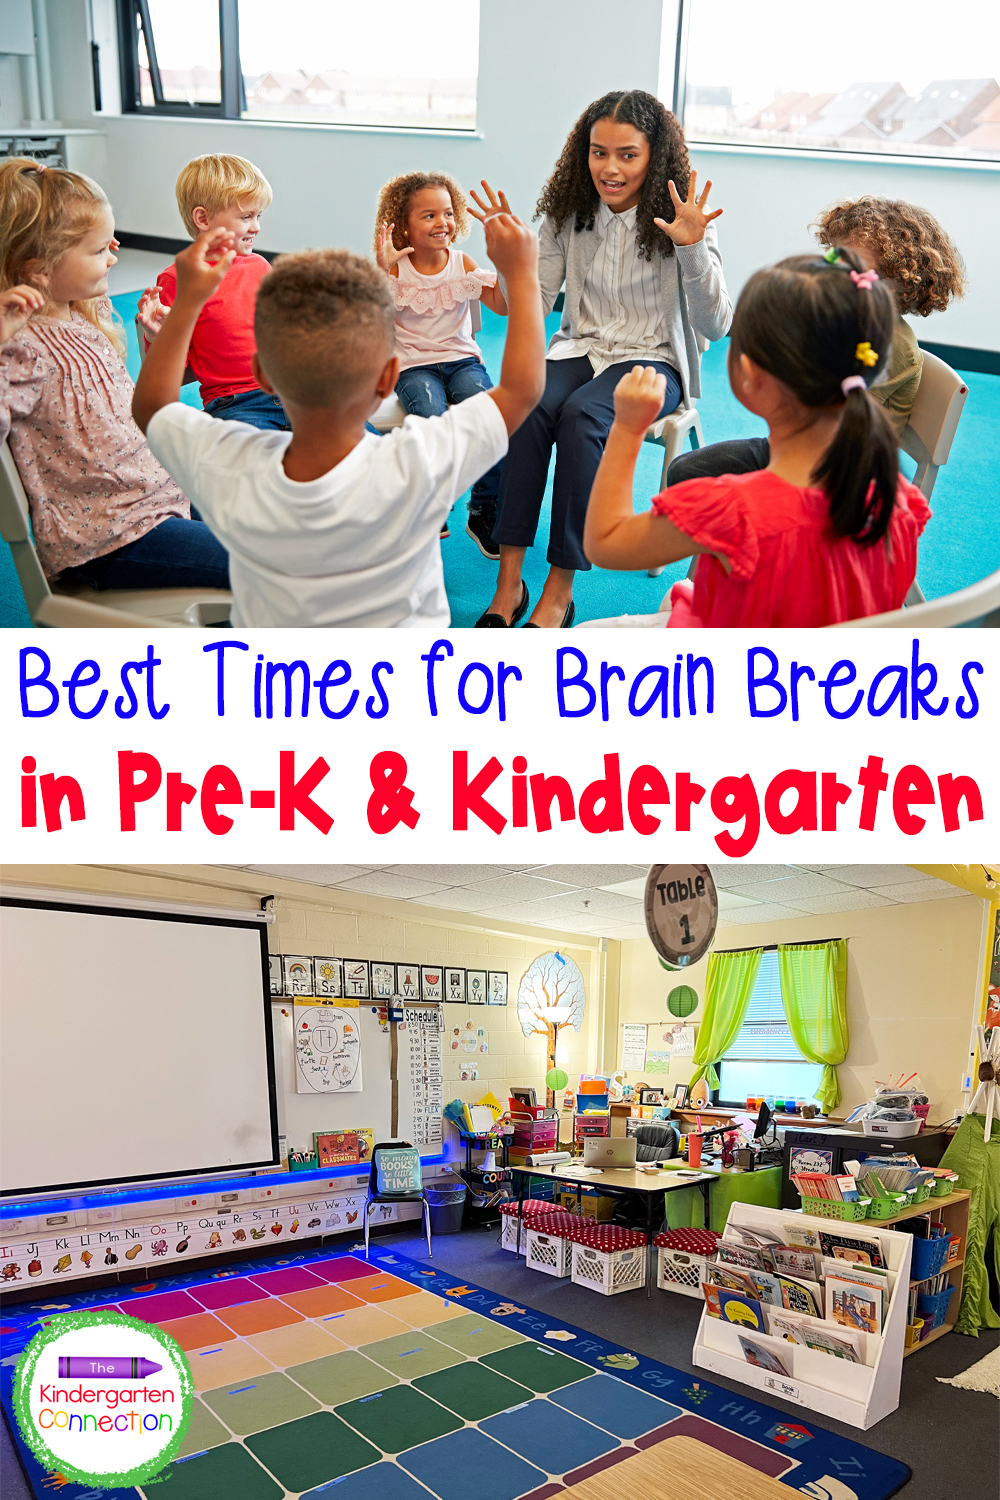 Brain breaks are a great tool for teachers and we're sharing the best times to use classroom brain breaks in Pre-K & Kindergarten!